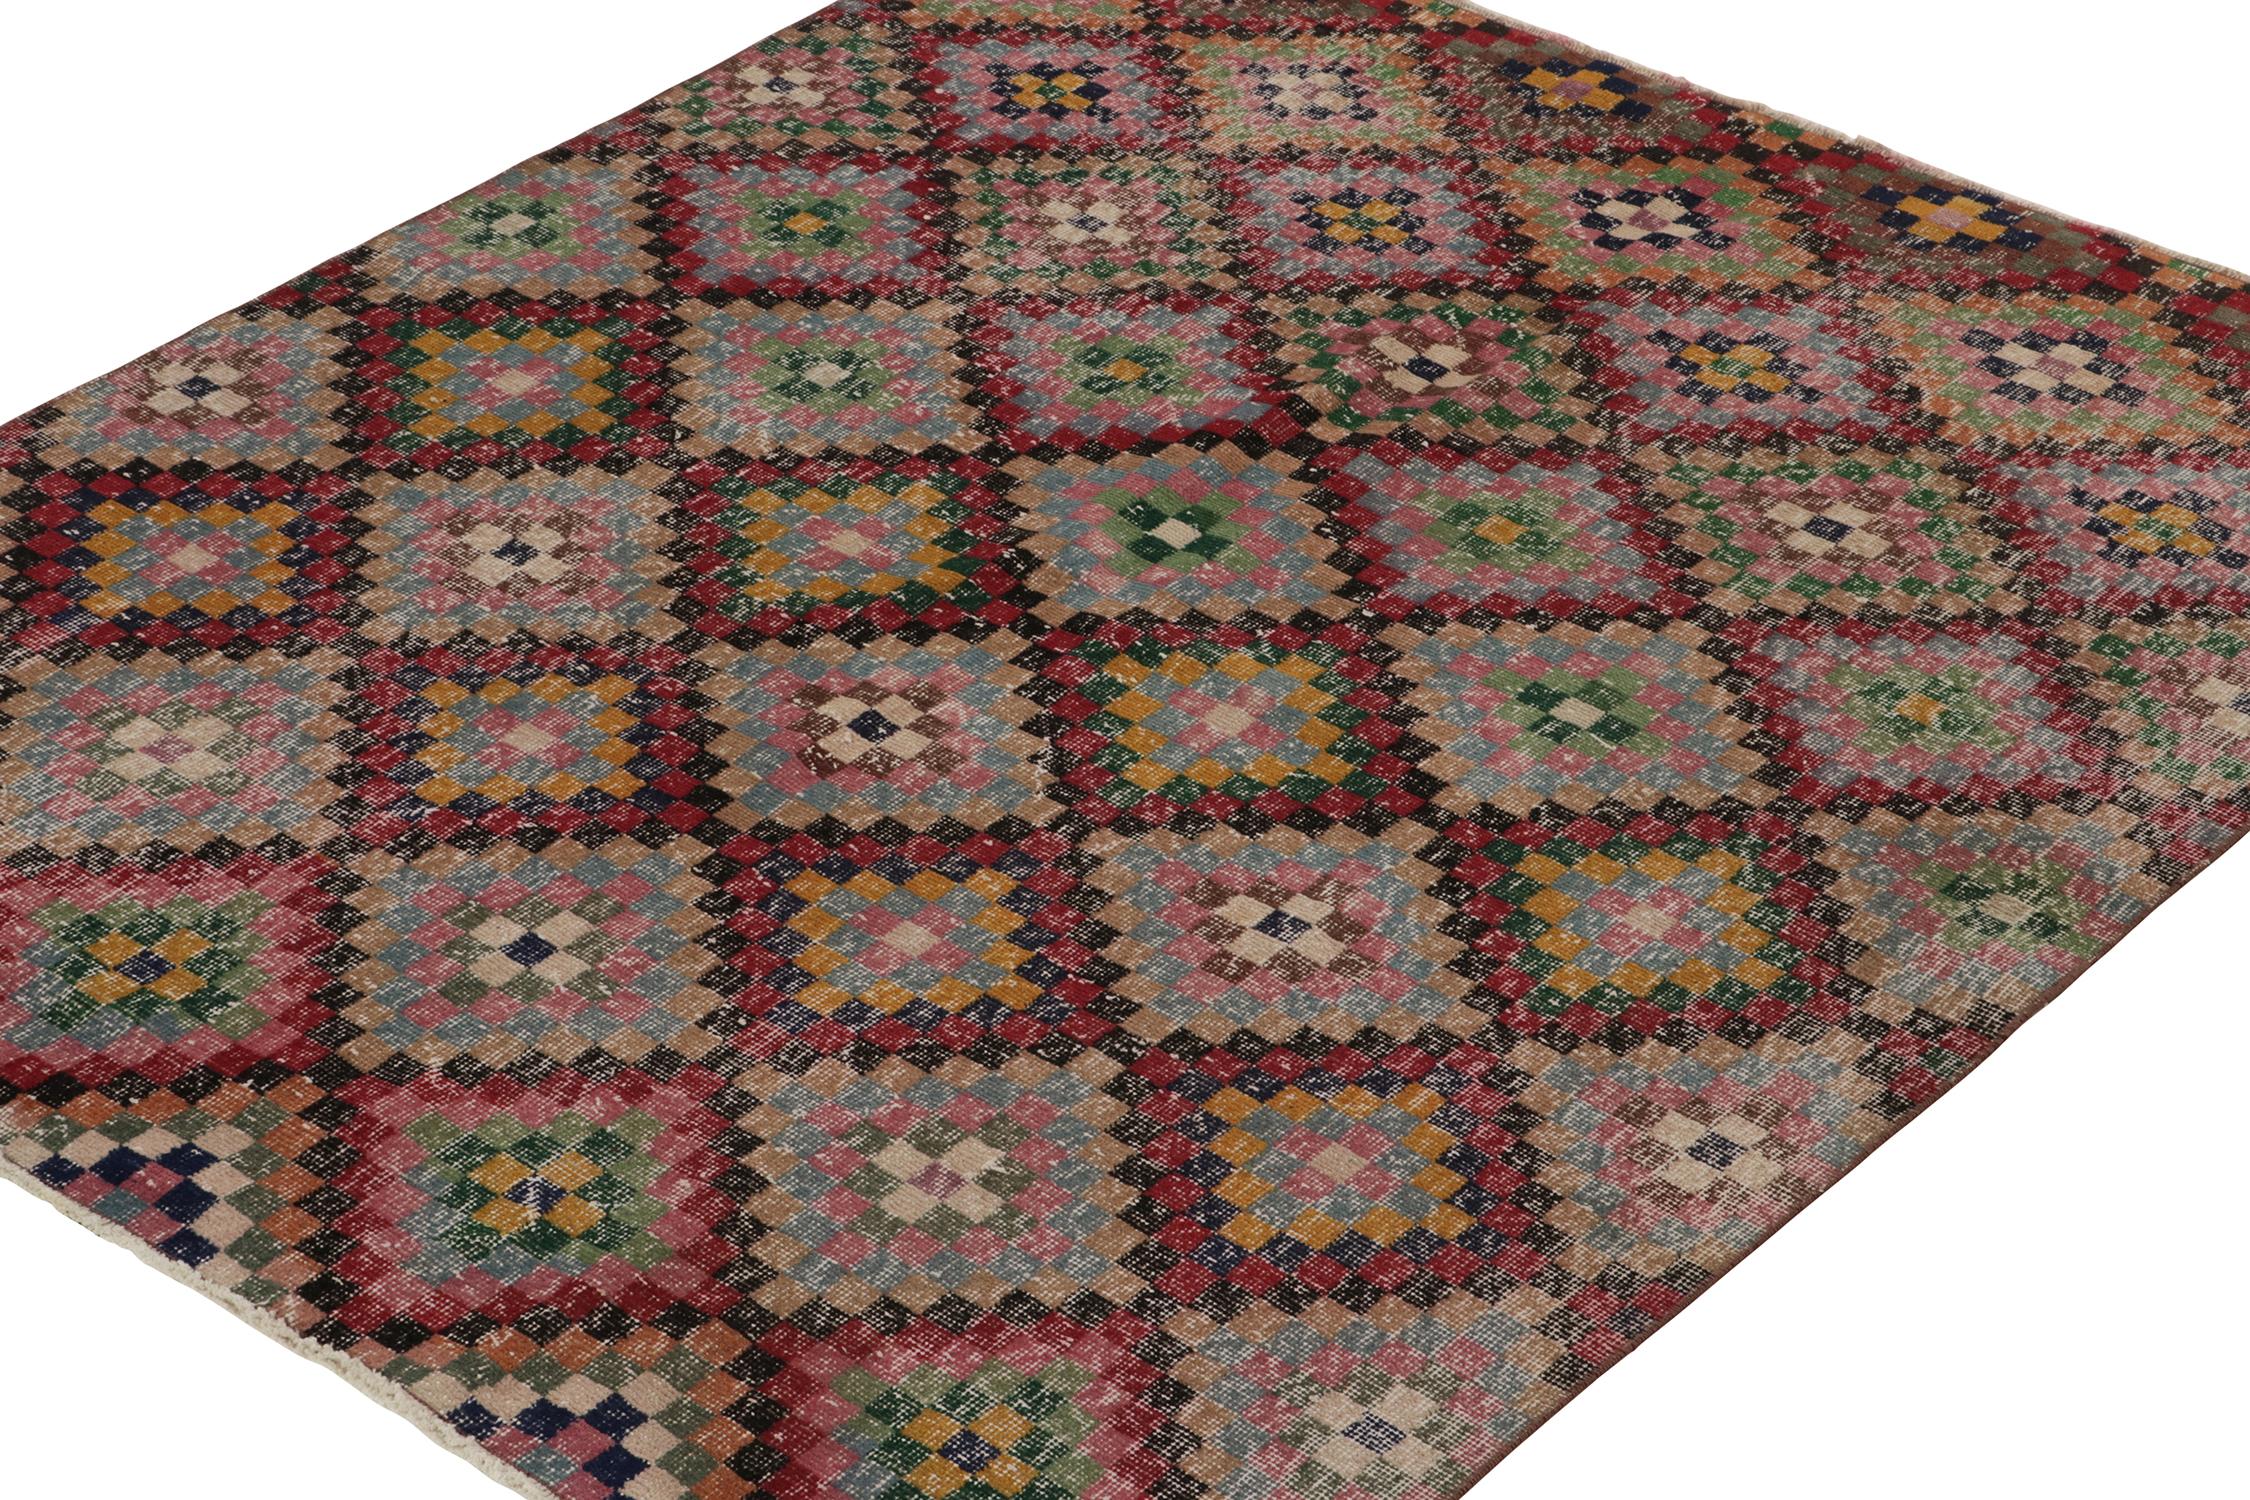 This vintage 6x6 rug is a new addition to Rug & Kilim’s commemorative Mid-Century Pasha Collection. This line is a commemoration of rare curations we believe to hail from mid-century Turkish designer Zeki Müren.

Further on the Design:

This